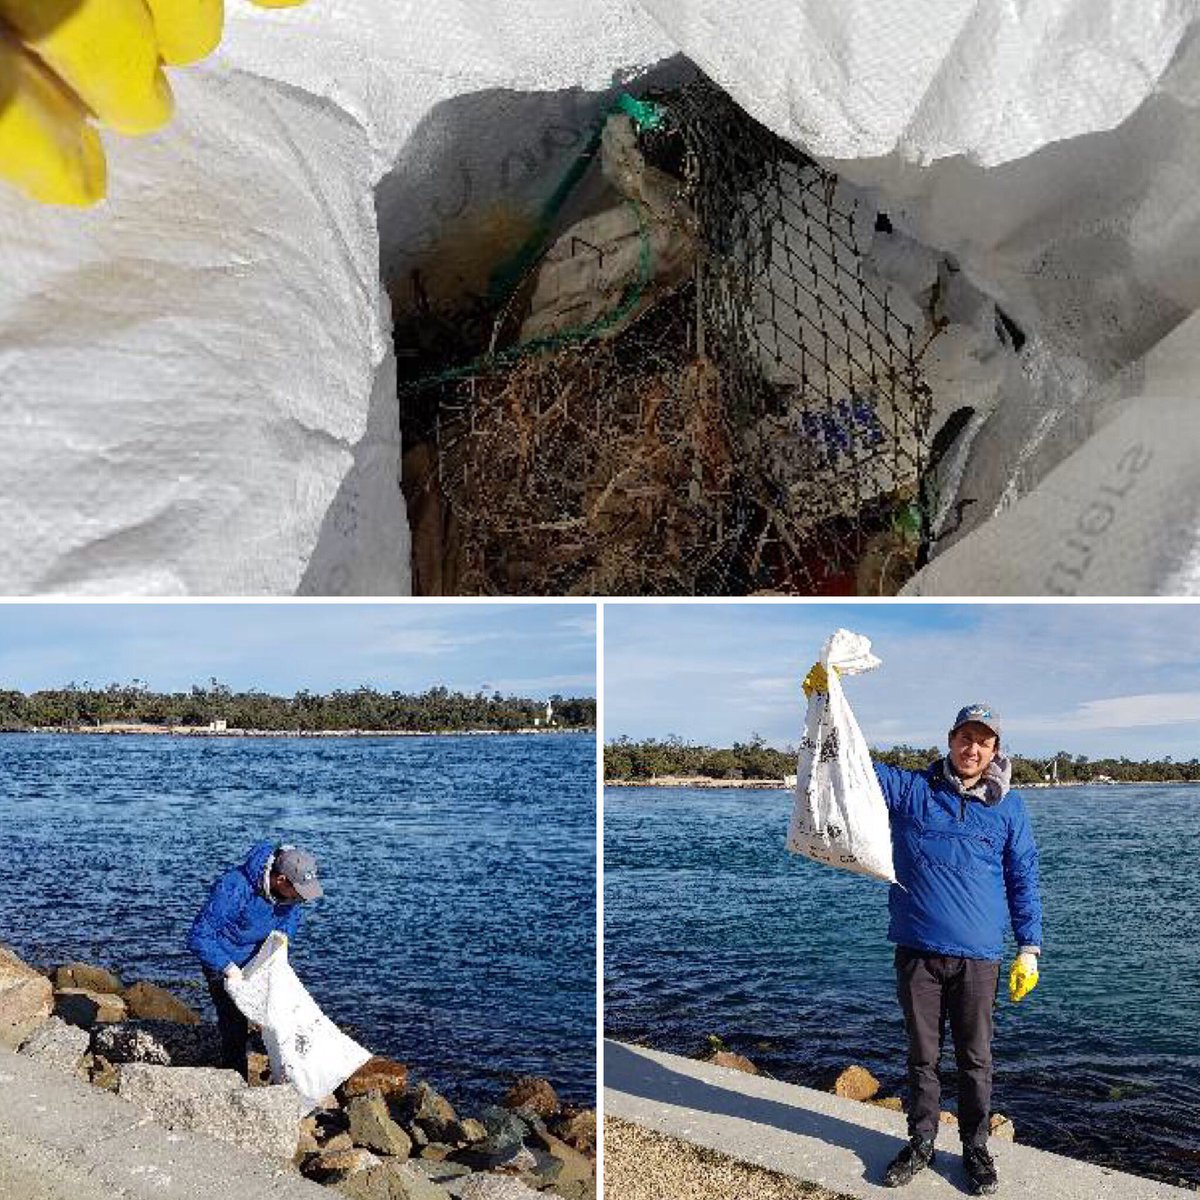 Our #dolphinresearch team did more than collect crucial data #cleanup #fishingwaste #litterfreelakes #plasticpollution